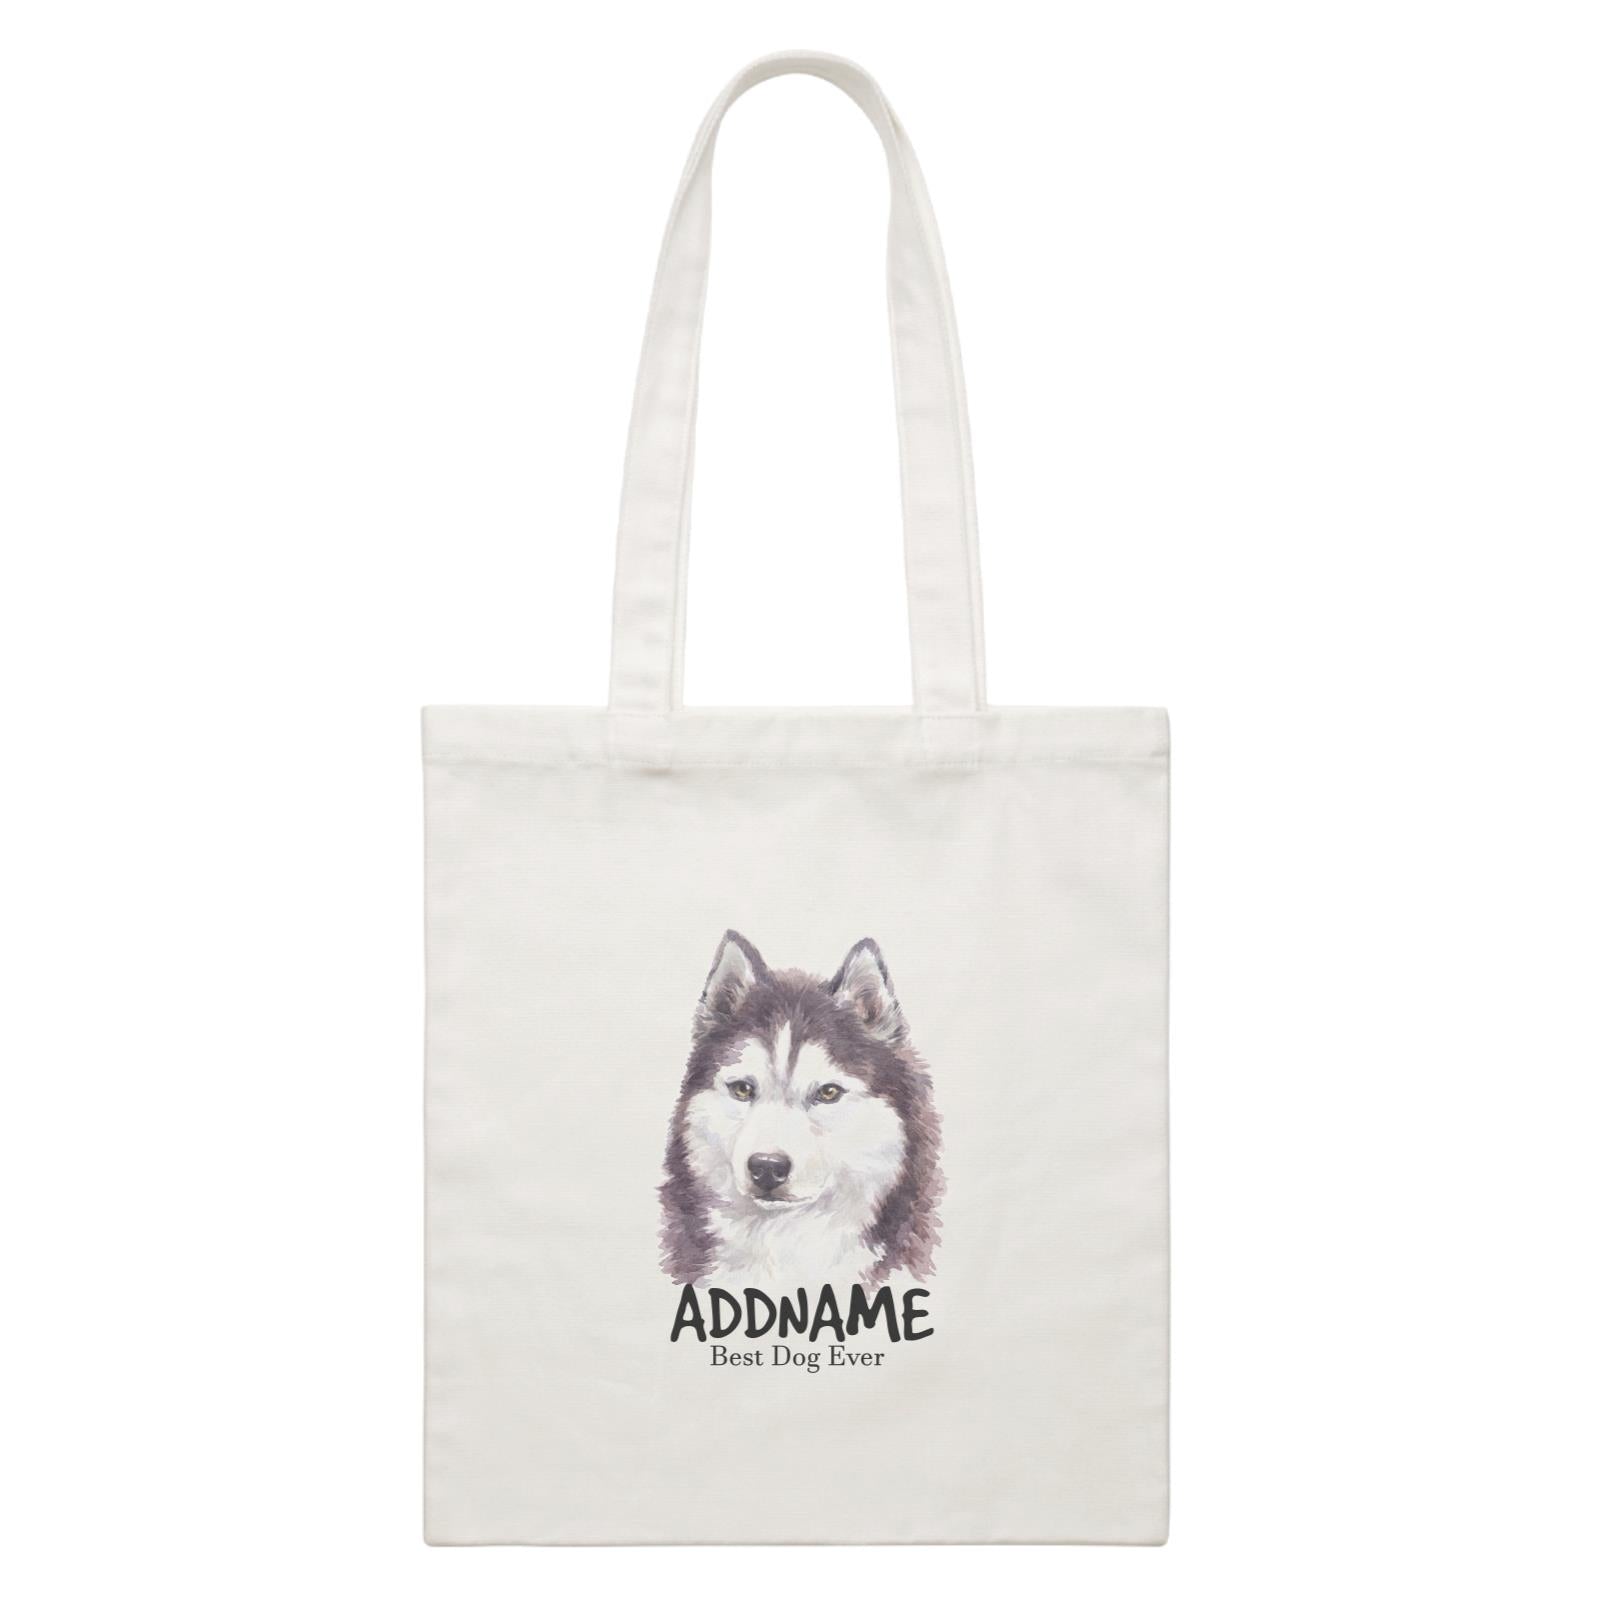 Watercolor Dog Siberian Husky Cool Best Dog Ever Addname White Canvas Bag